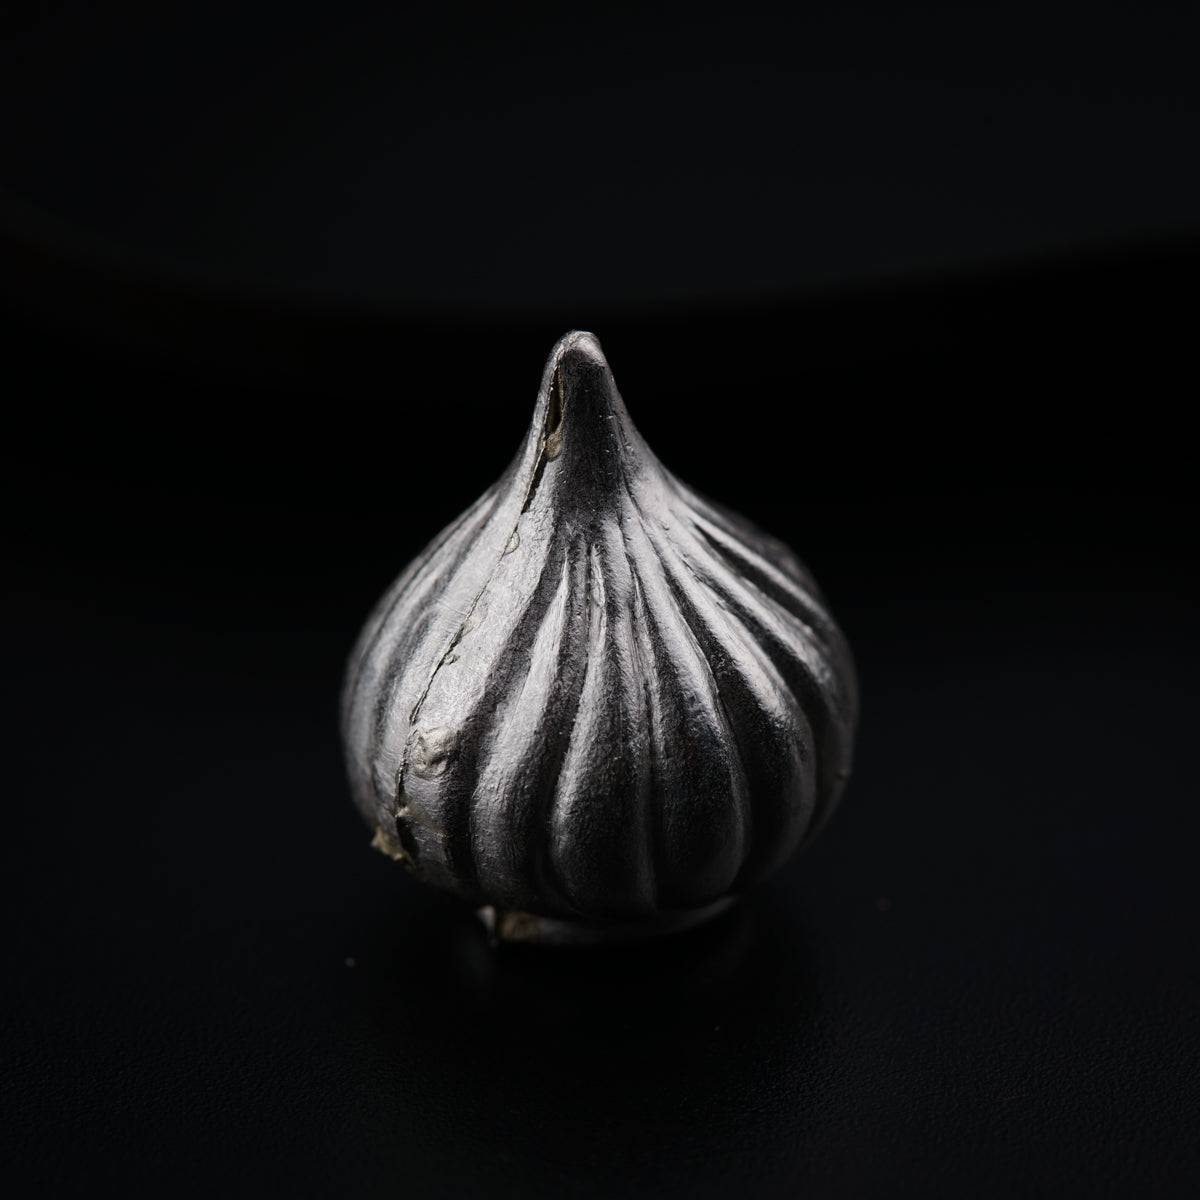 a close up of a garlic on a black background